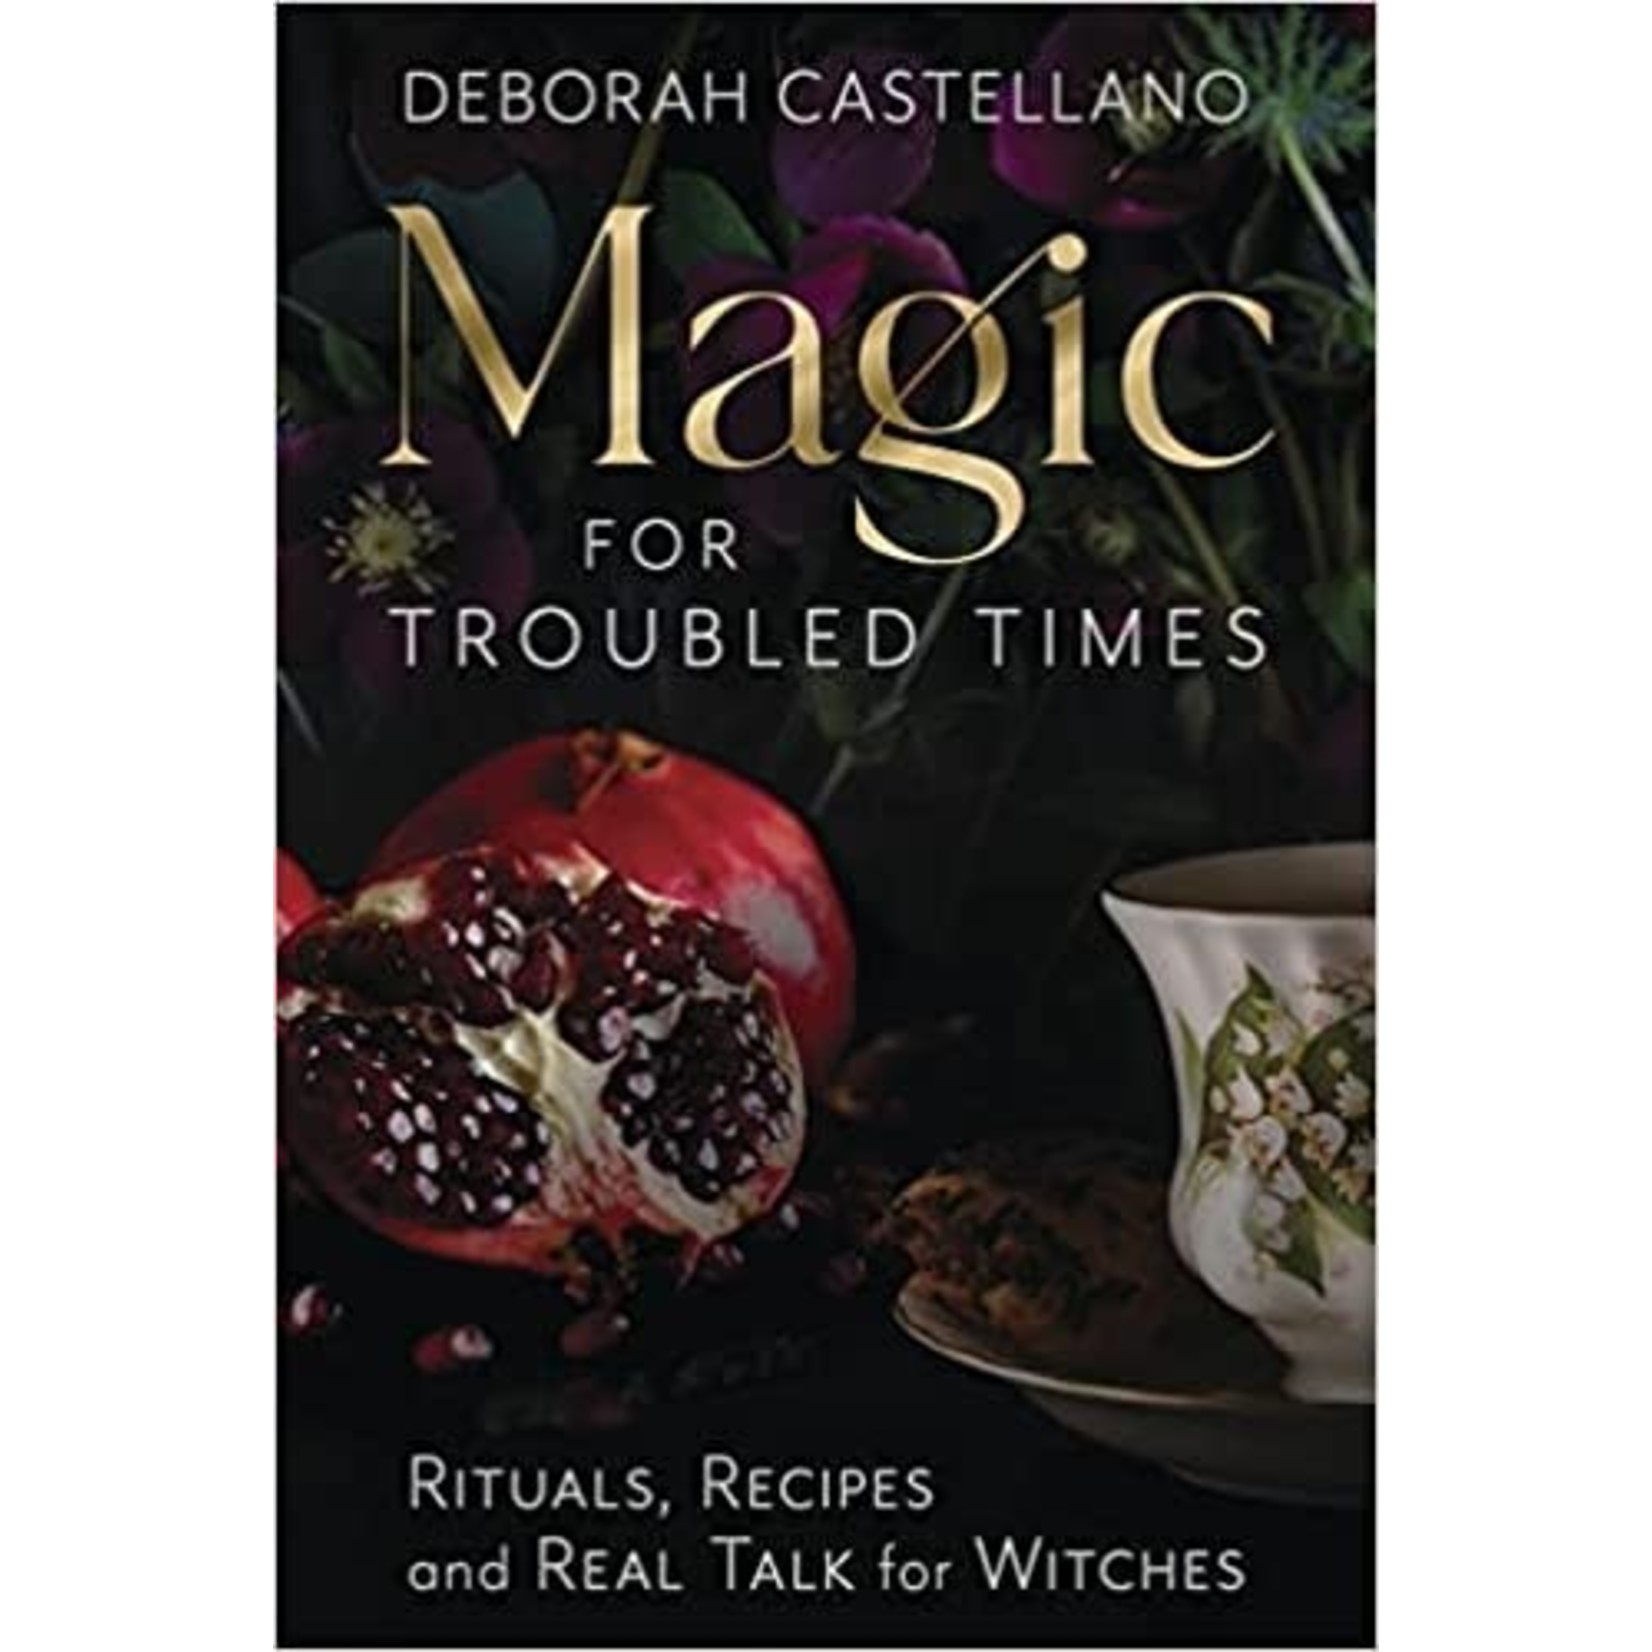 Magic For Troubled Times by Deborah Castellano